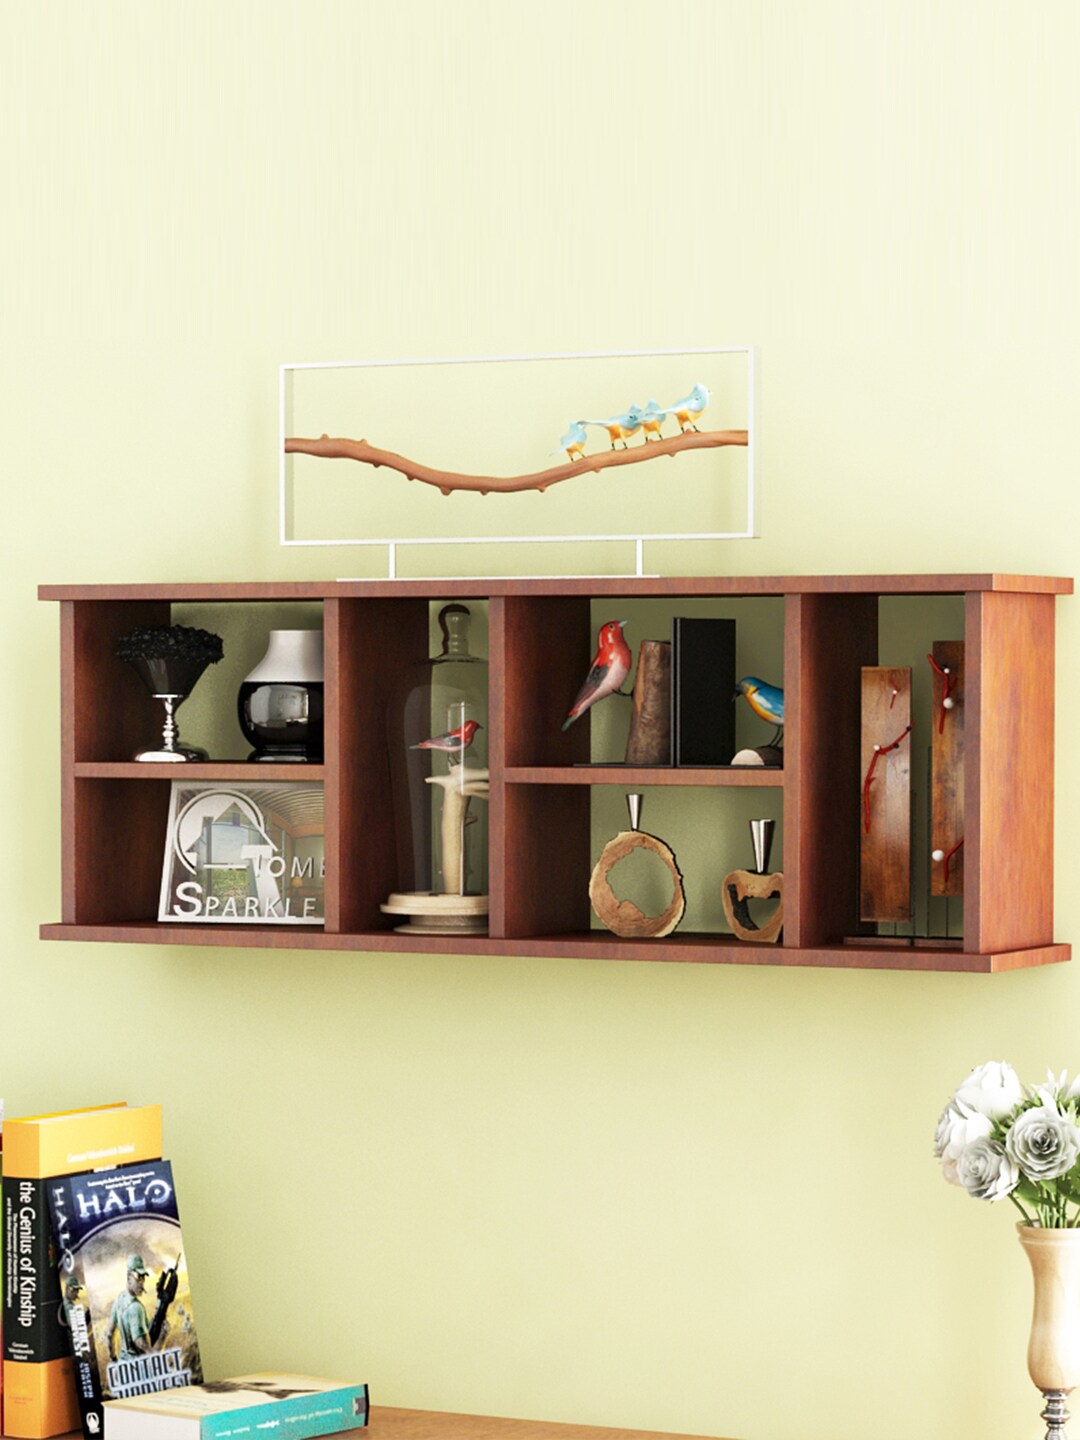 Home Sparkle Brown Wood Wall Shelf With Partitions Price in India